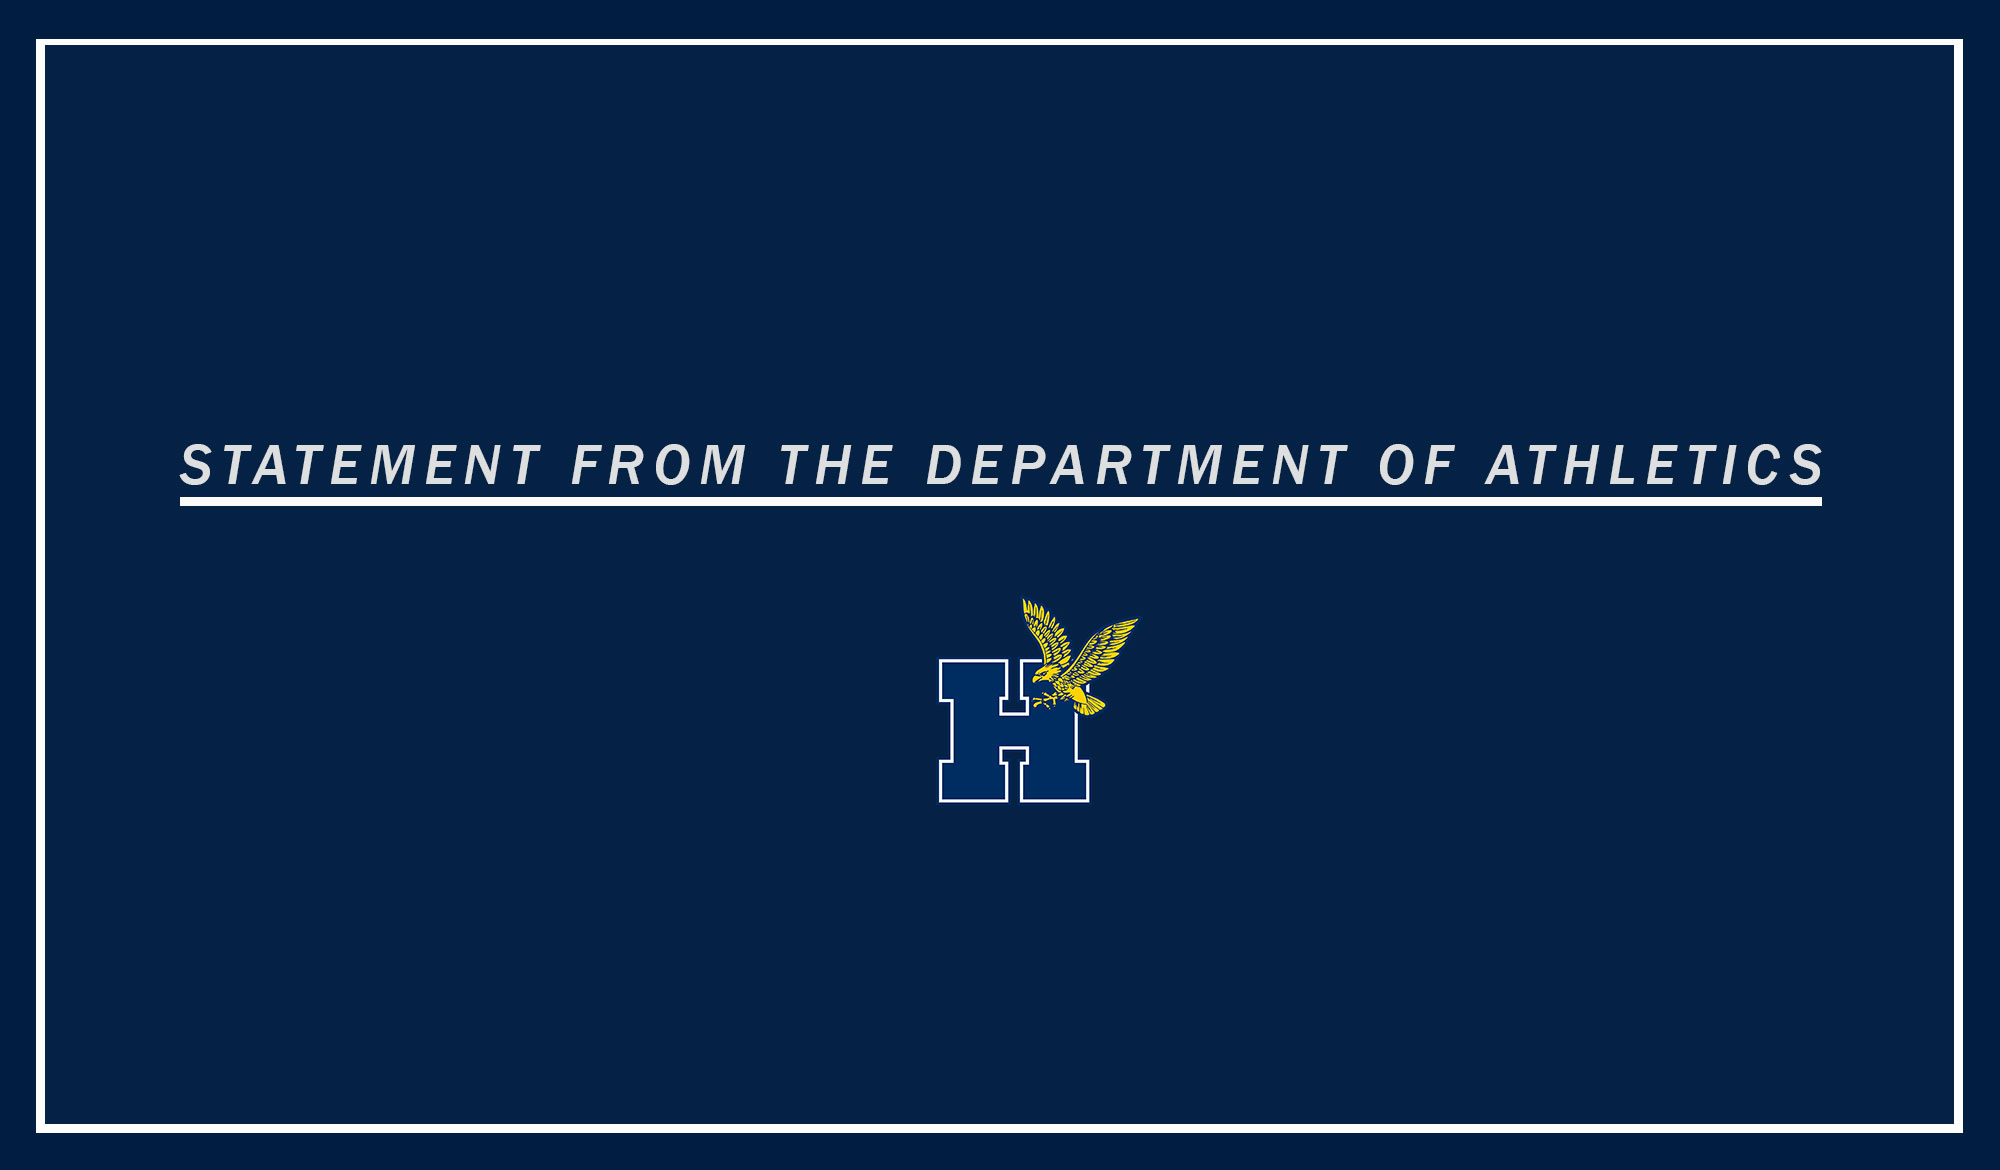 Statement from the Humber Department of Athletics